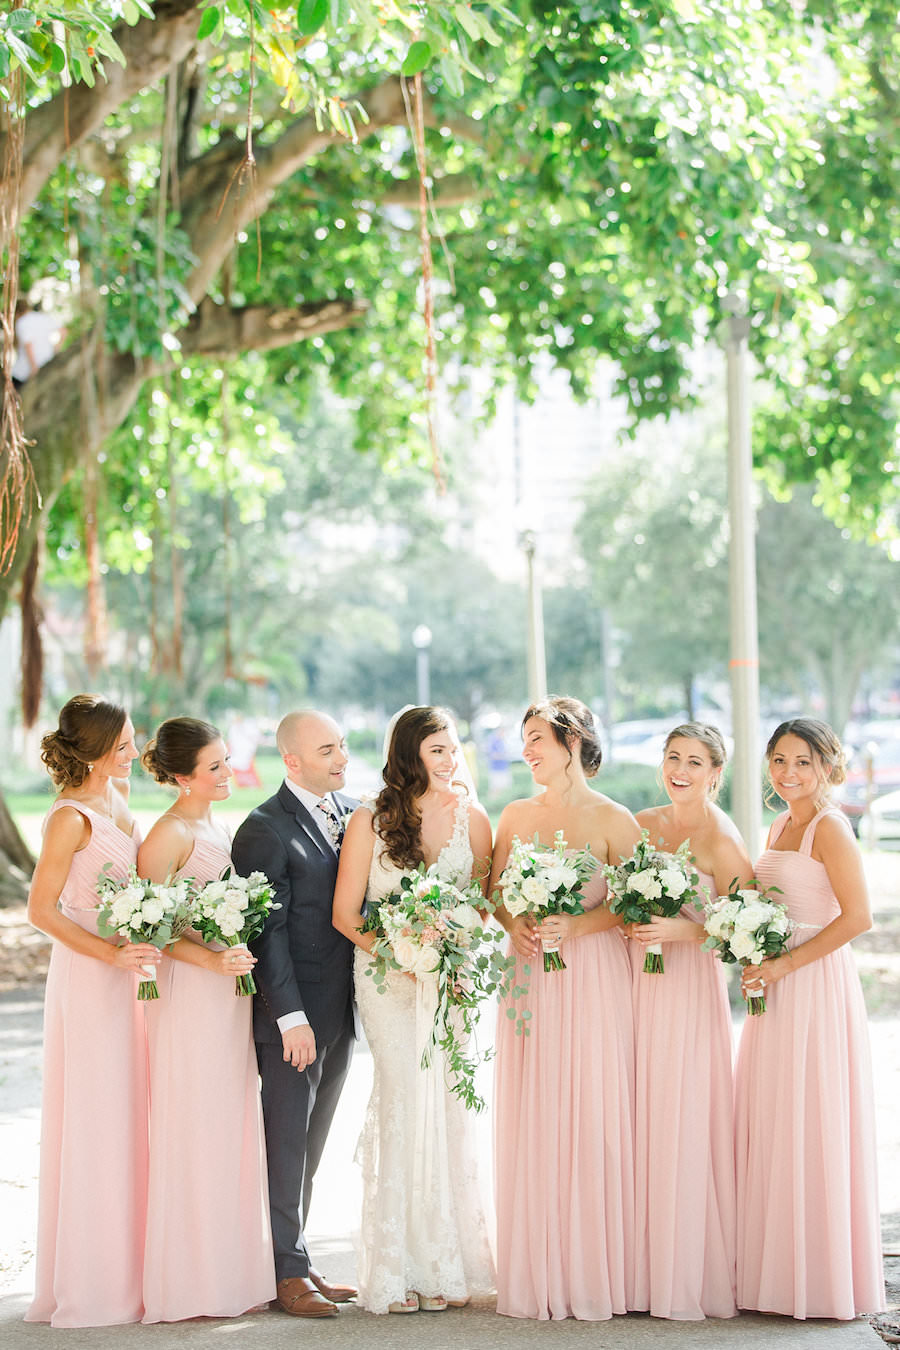 Outdoor, Downtown St. Petersburg Bridal Party with Bridesmaids in Blush Dresses Wedding Portrait | St. Petersburg Wedding Venue The Birchwood | Tampa Bay Wedding Photographer Ailyn La Torre Photography